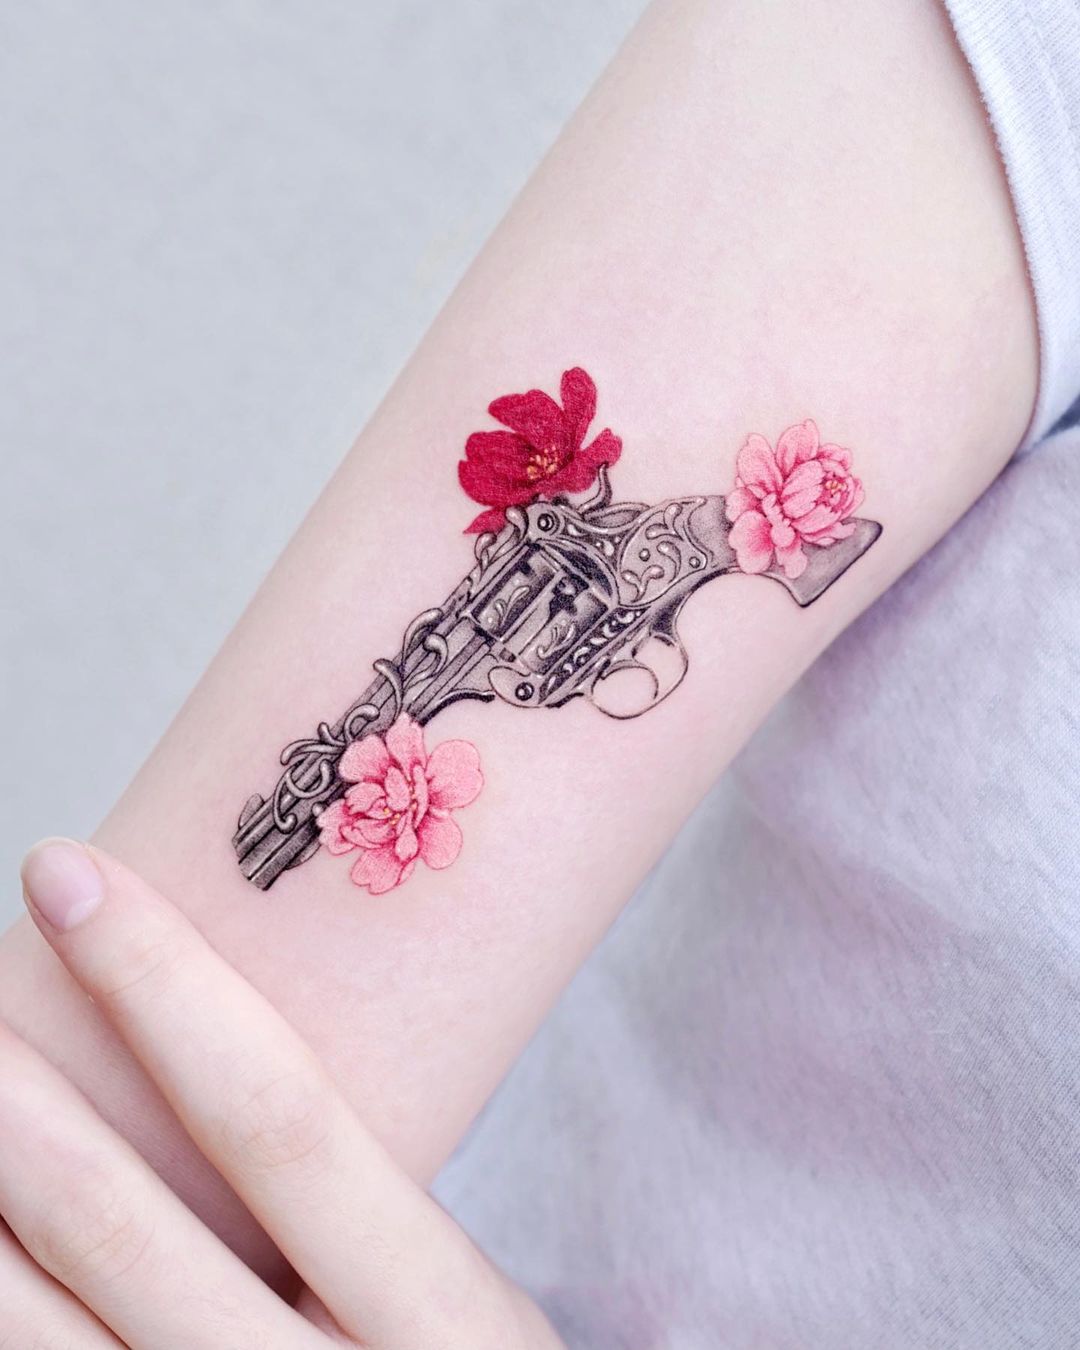 Greatest Tattoo Ideas For Women In 2021 images 29